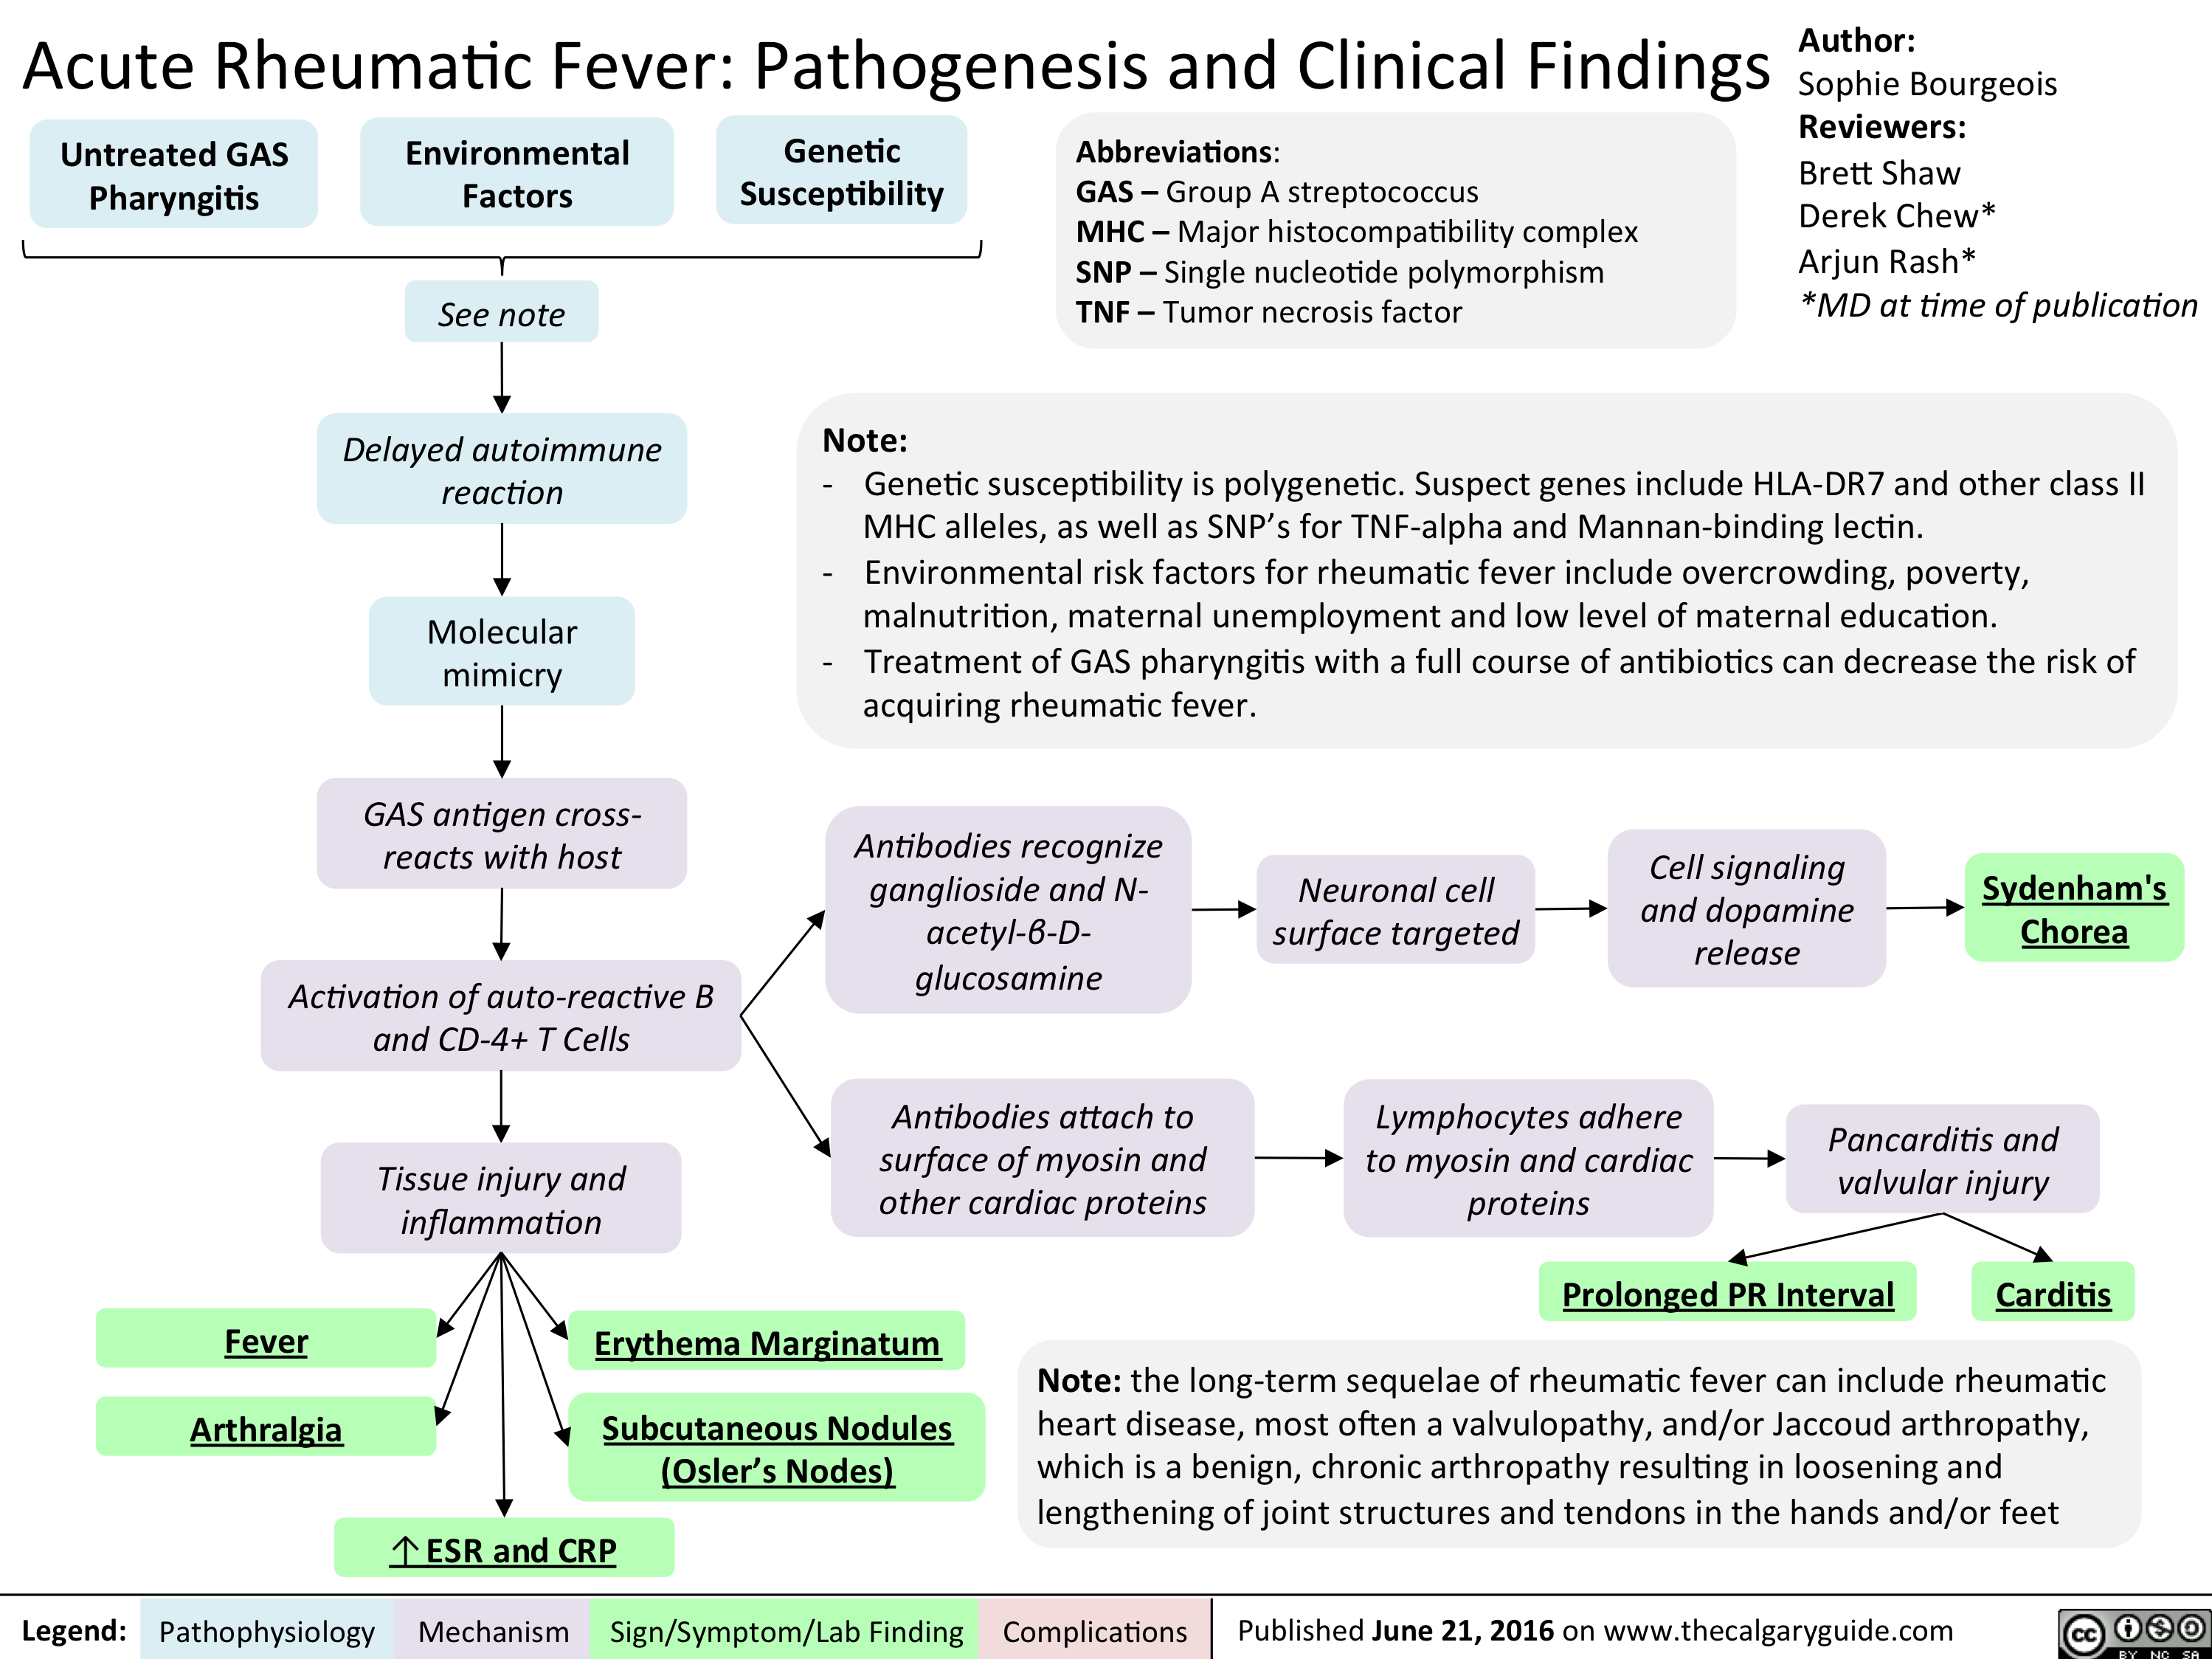 Acute Rheumatic Fever- Pathogenesis and Clinical Findings